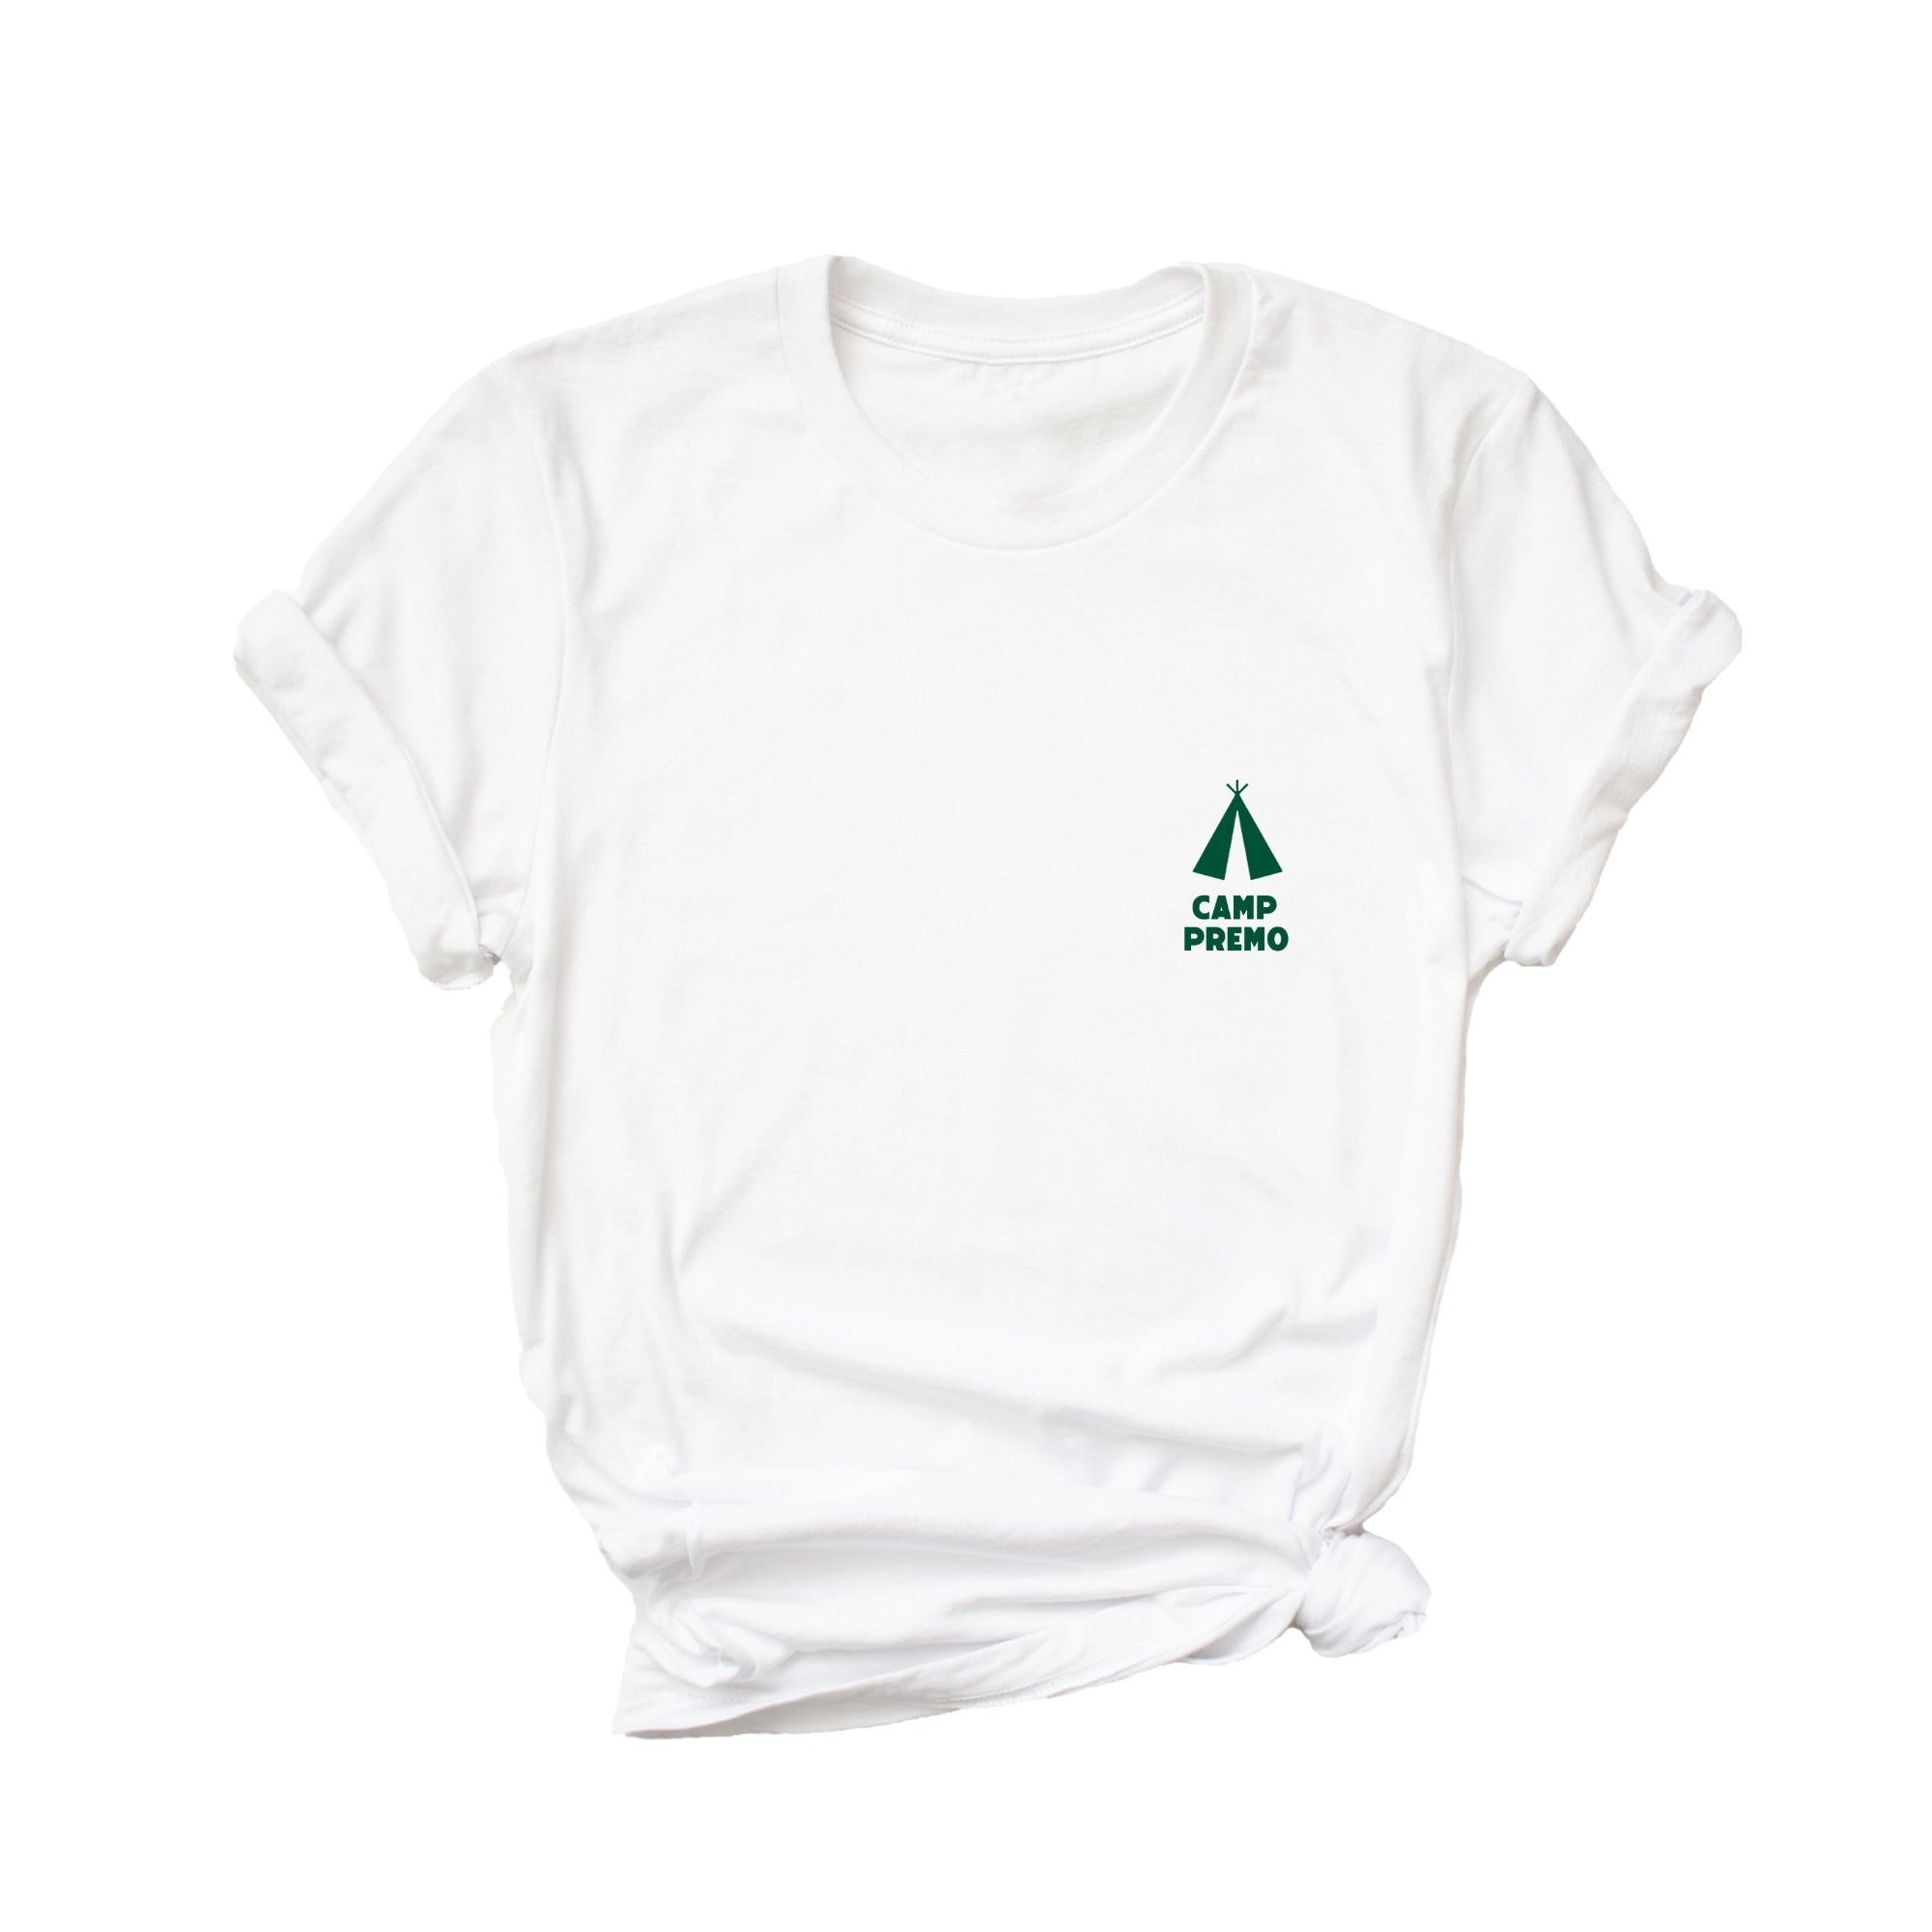 A white t-shirt reads "Camp Premo" with a tent icon